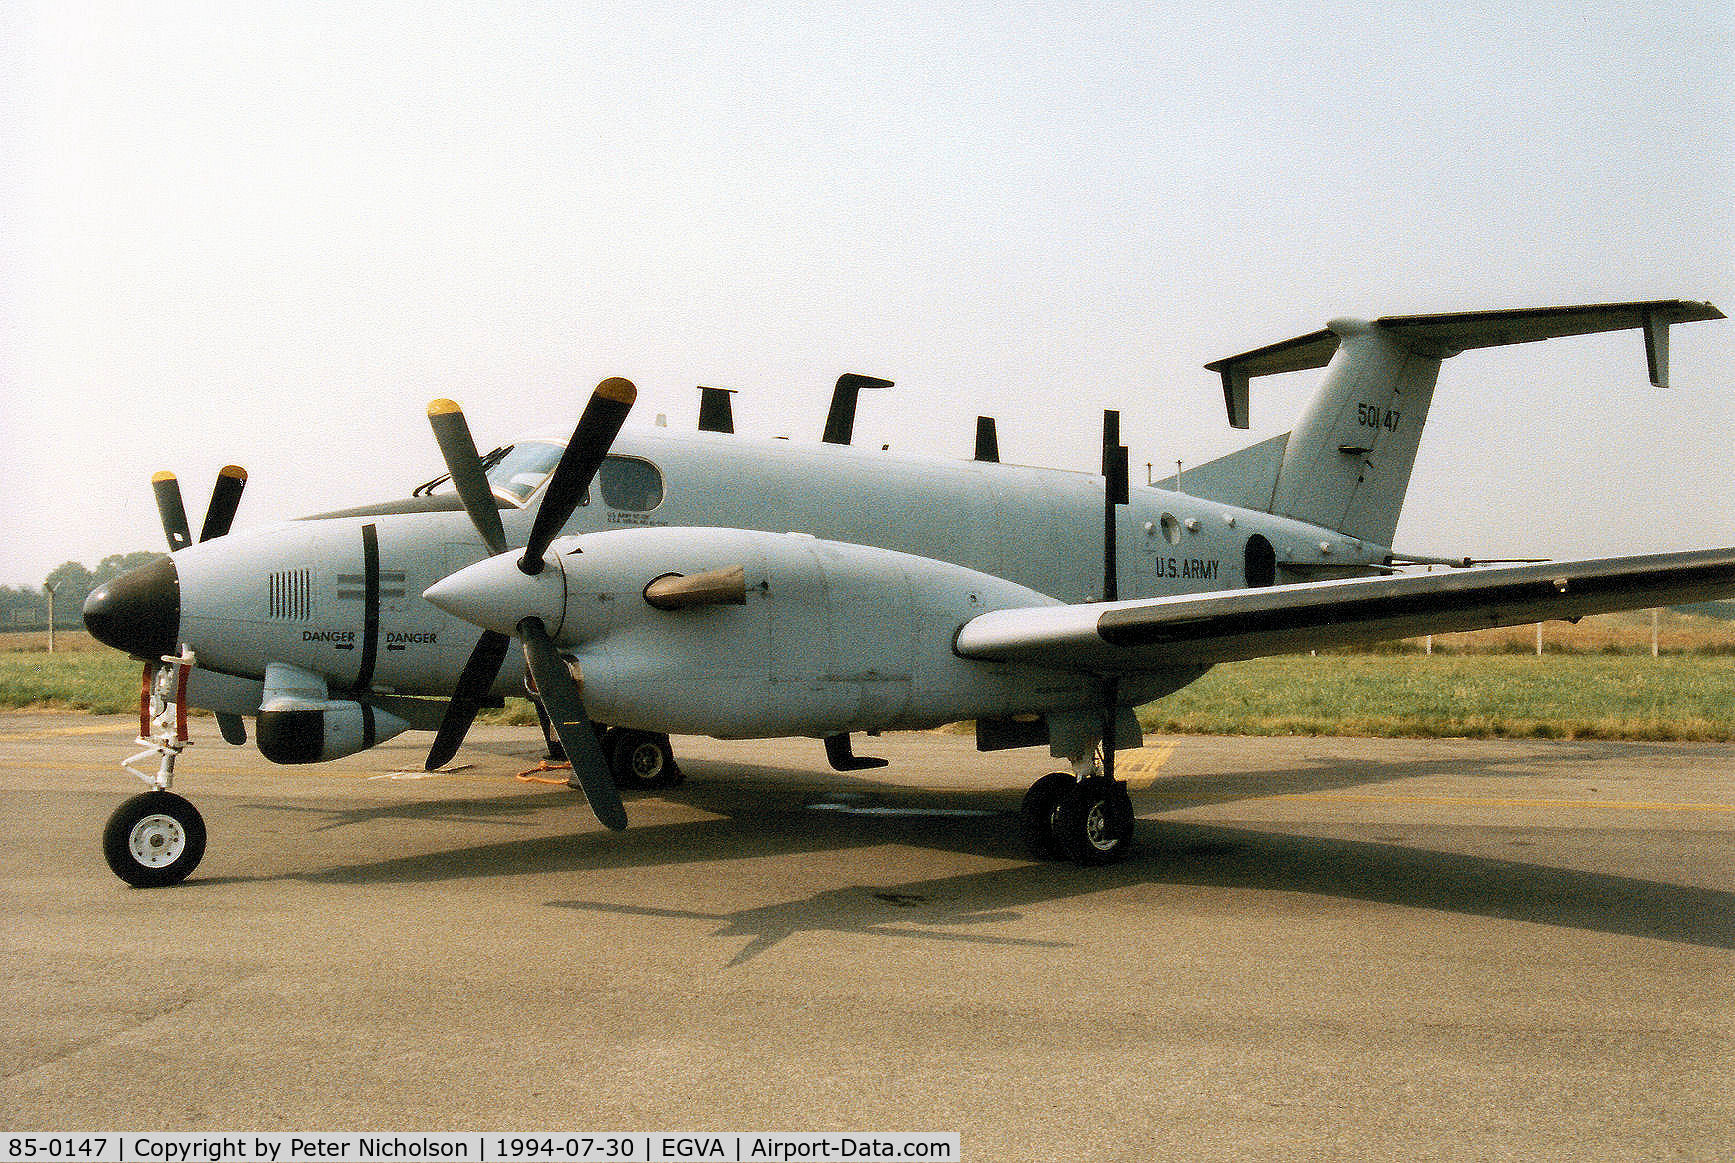 85-0147, 1984 Beech RC-12K Huron C/N FE-001, RC-12K Huron, radio callsign Argus 53,  of 1st Military Intelligence Battalion based at Wiesbaden, Germany on display at the 1994 International Air Tattoo at RAF Fairford.